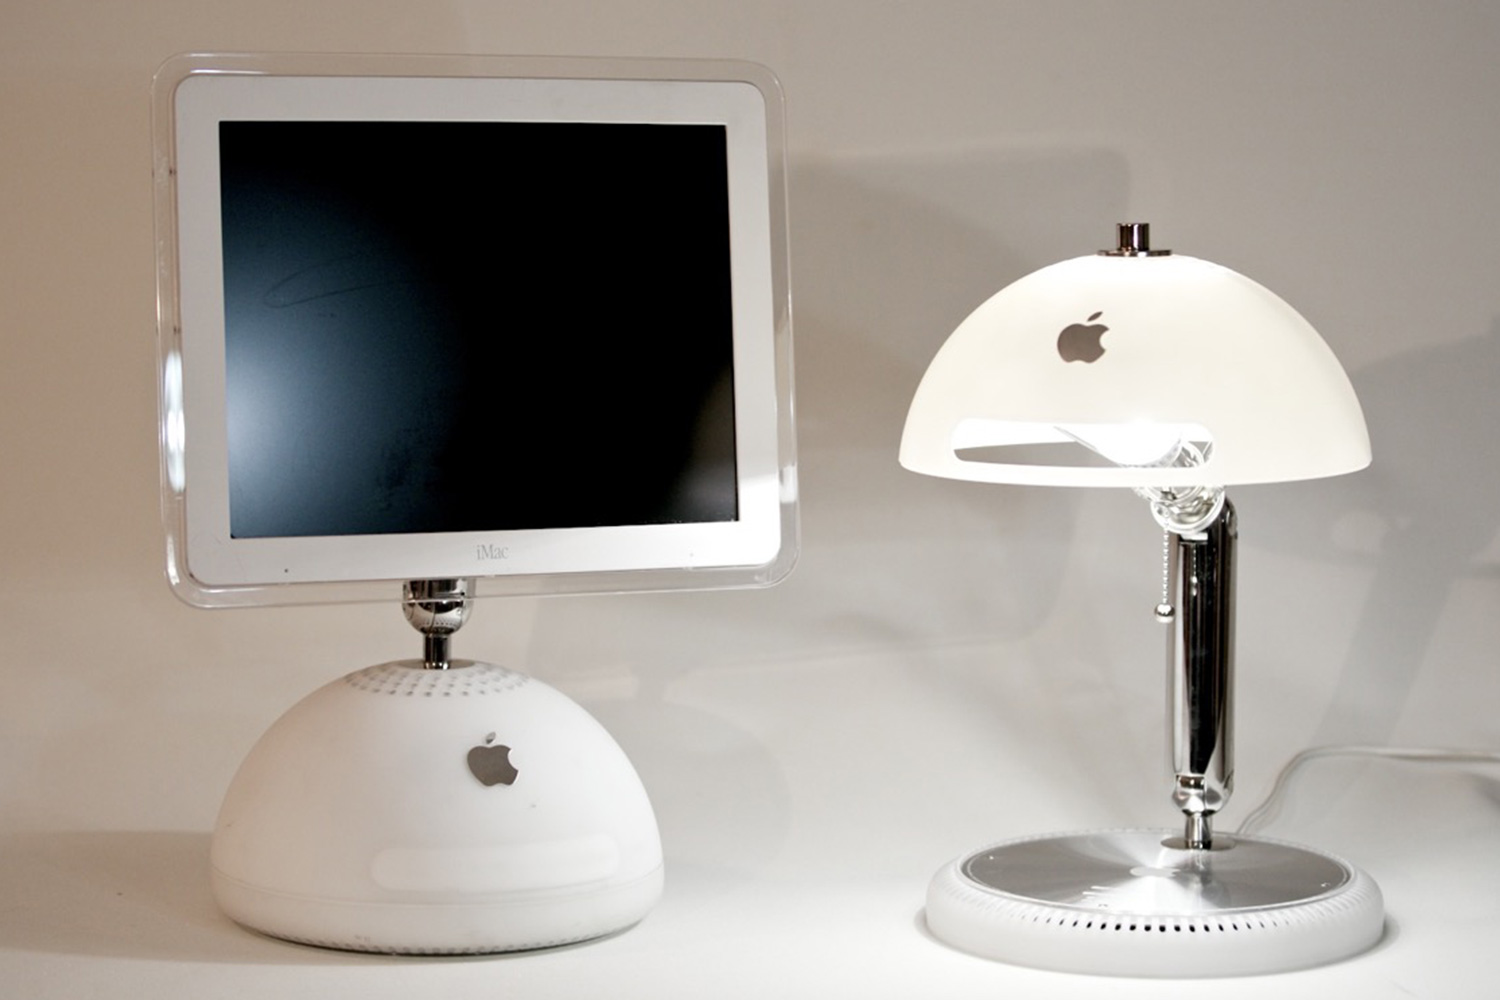 ilamp desktop lamps made from old imacs ilamps 004